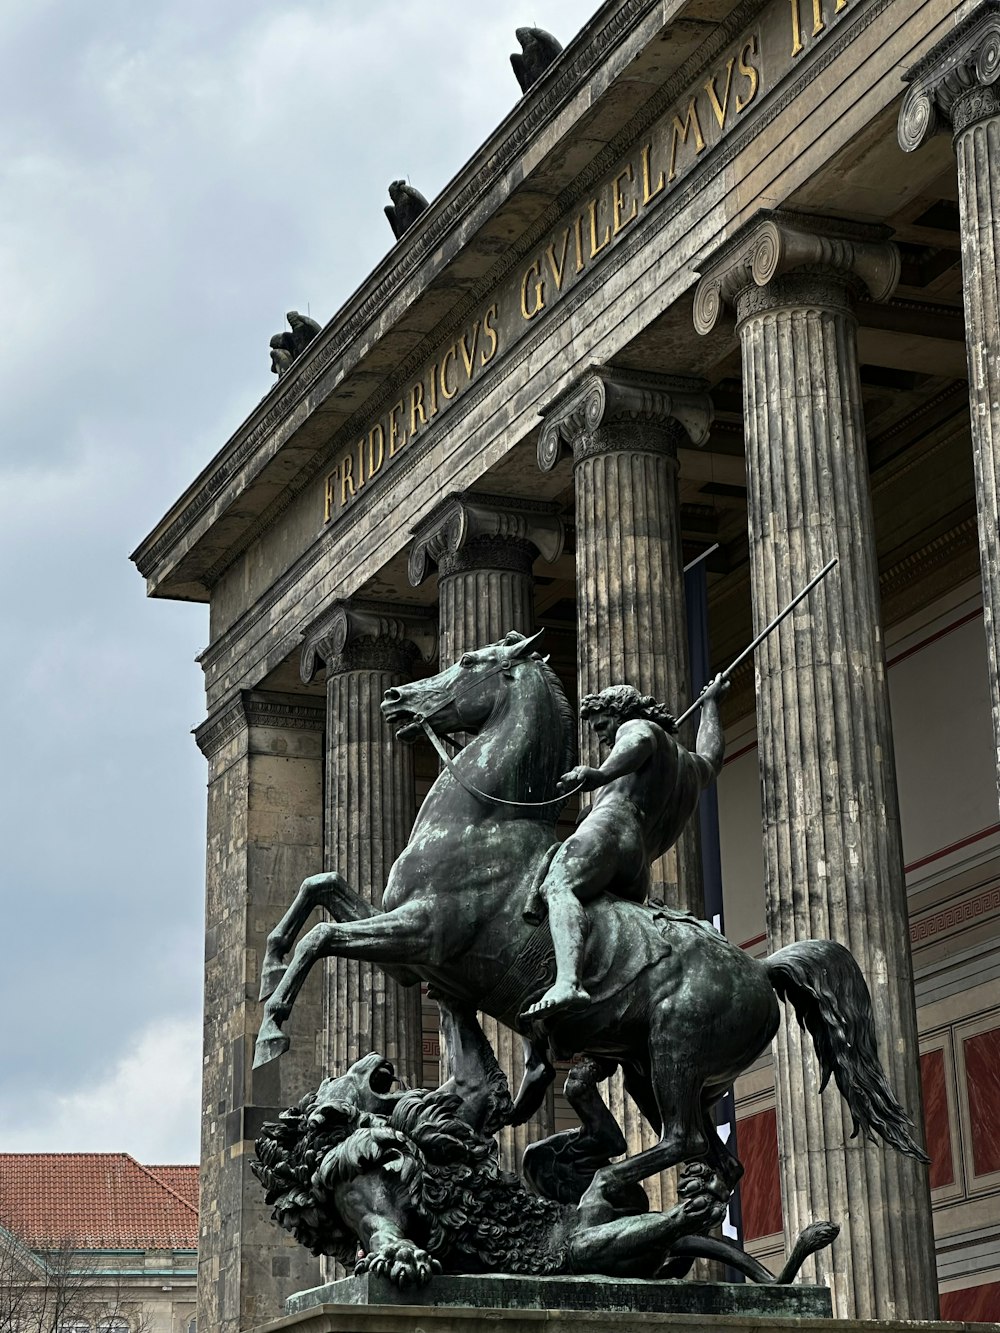 a statue of a man riding a horse in front of a building